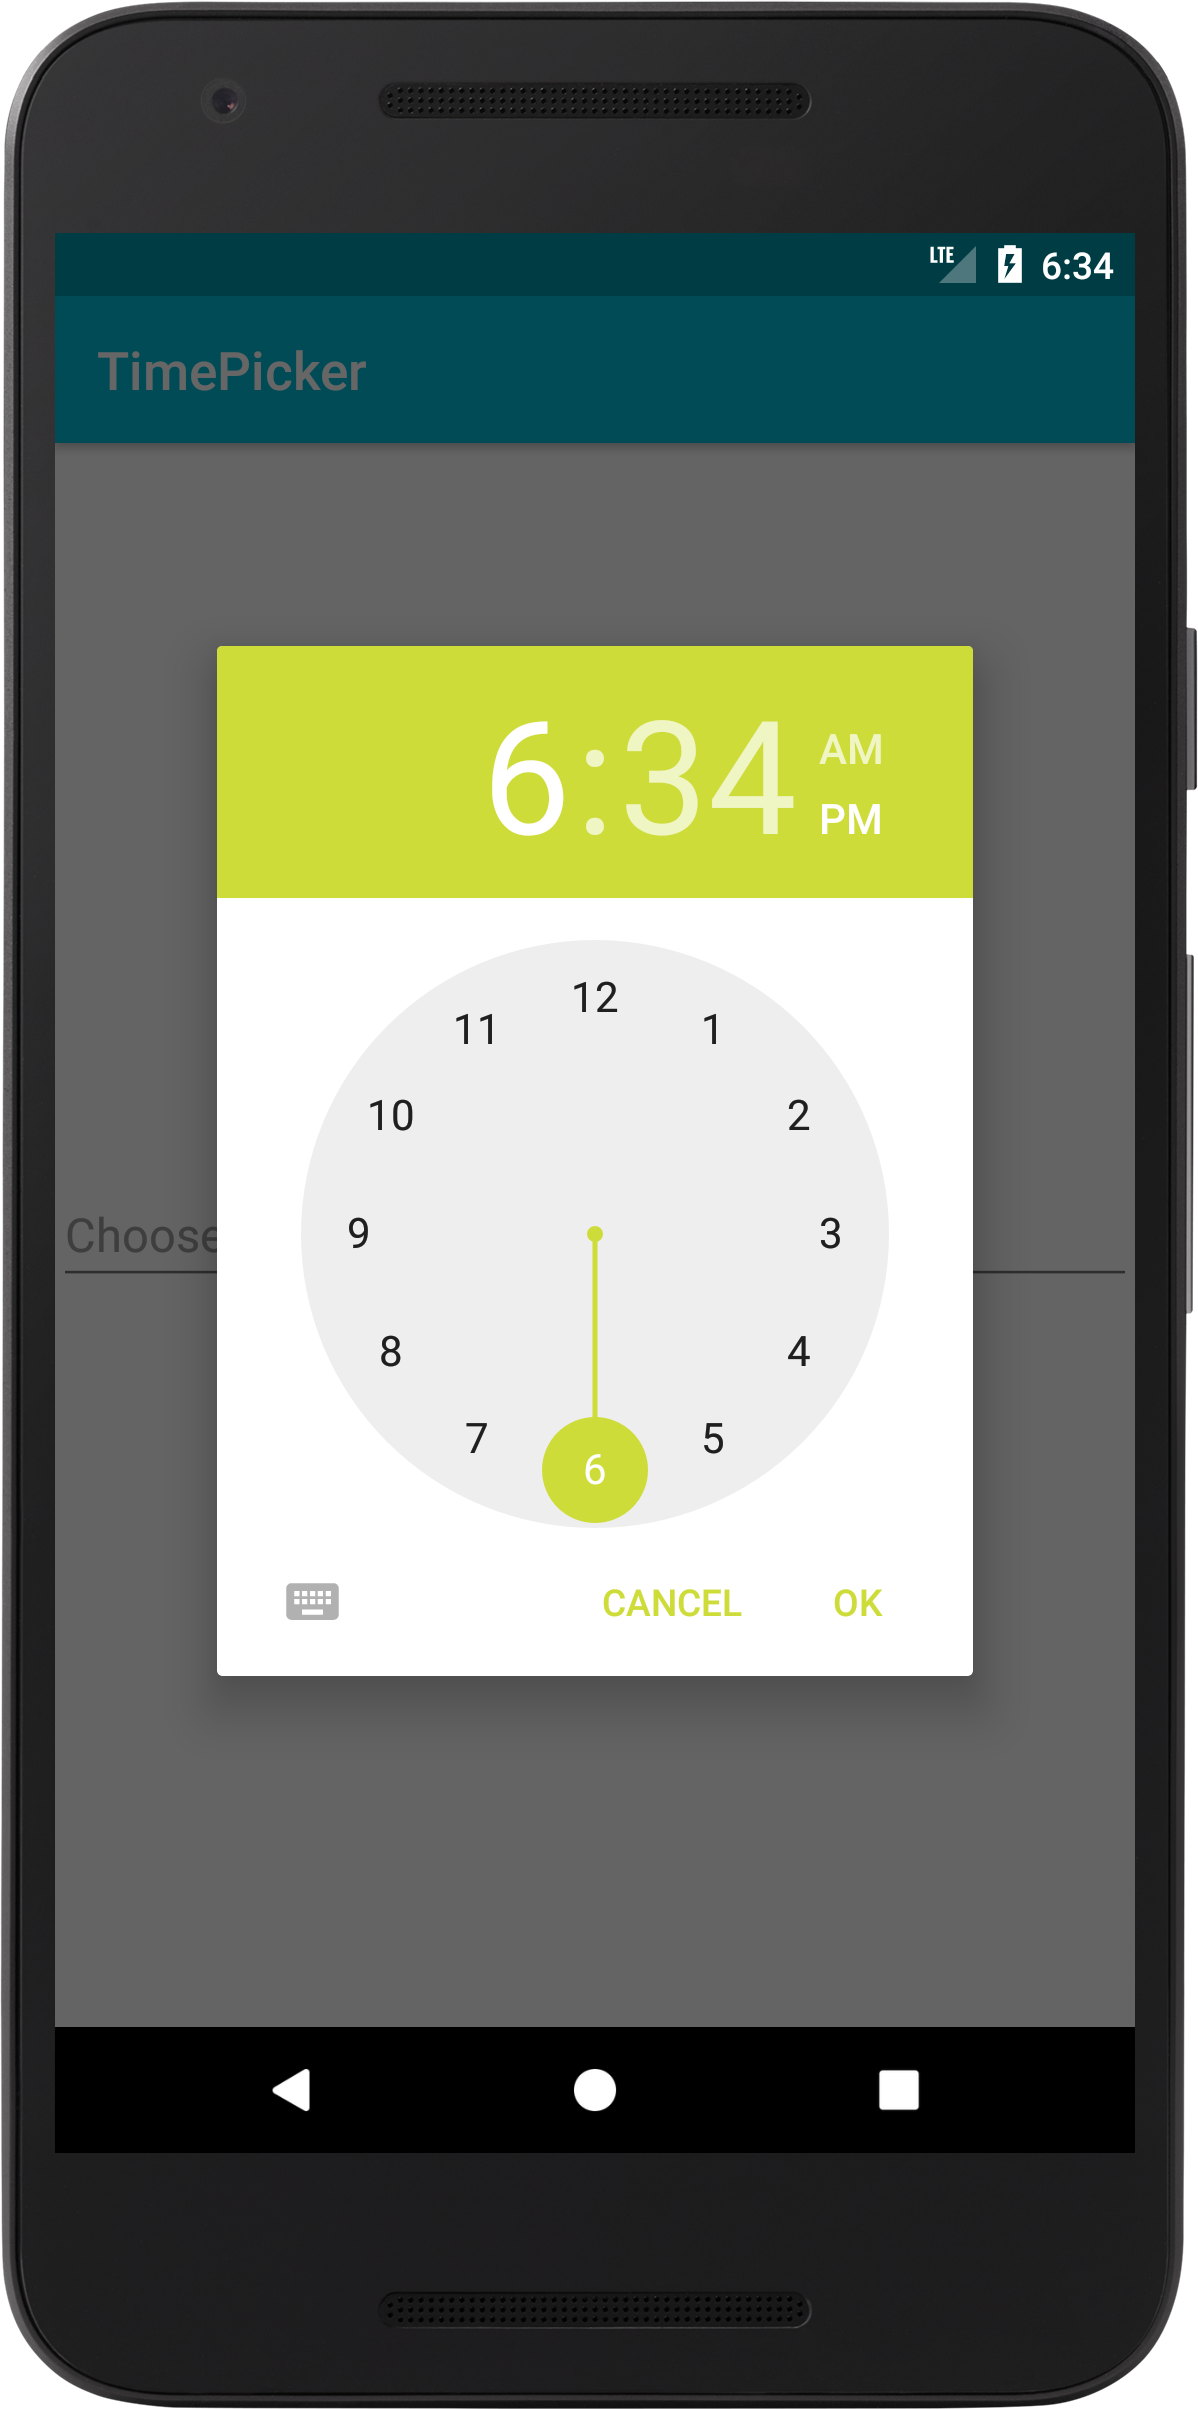 Android Timepicker - Use EditText to Show TimePickerDialog - Coding Demos